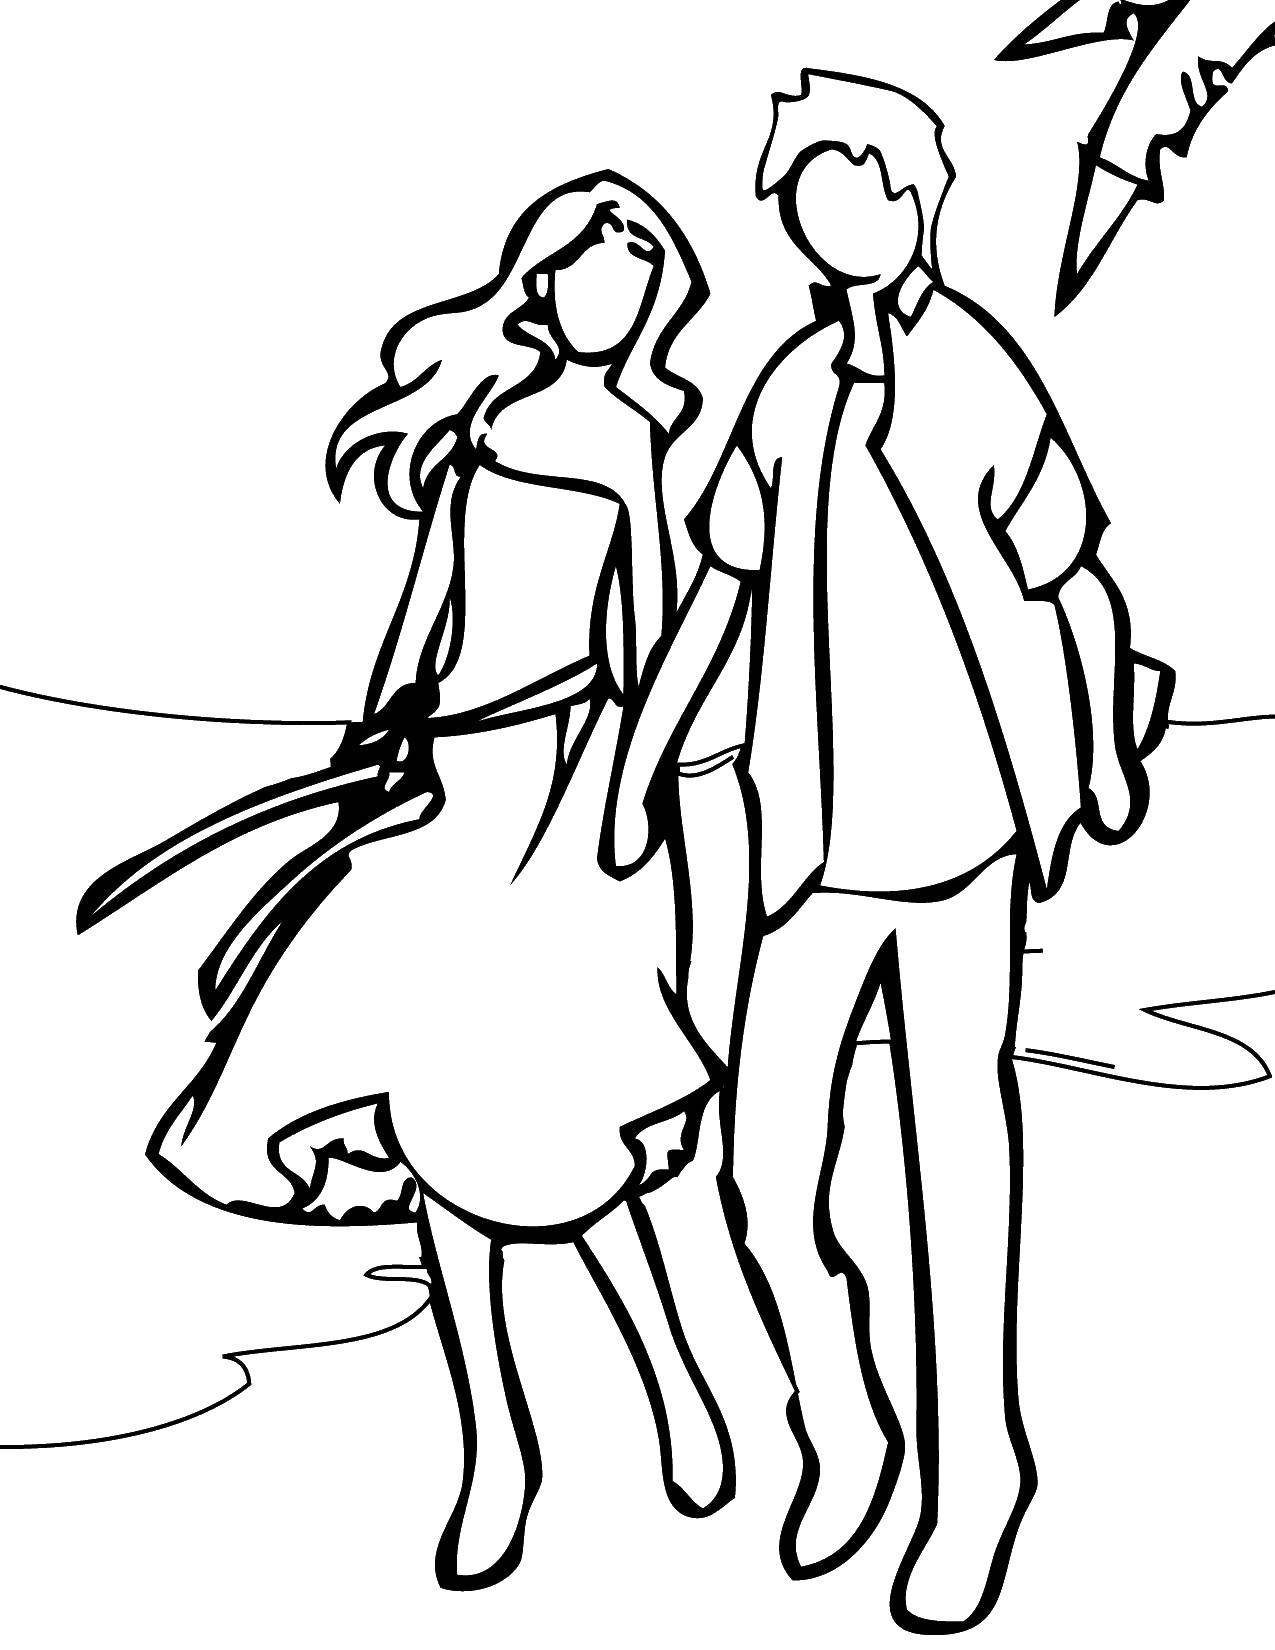 Coloring The guy with the girl walking on the beach. Category Beach. Tags:  beach, boy, girl.